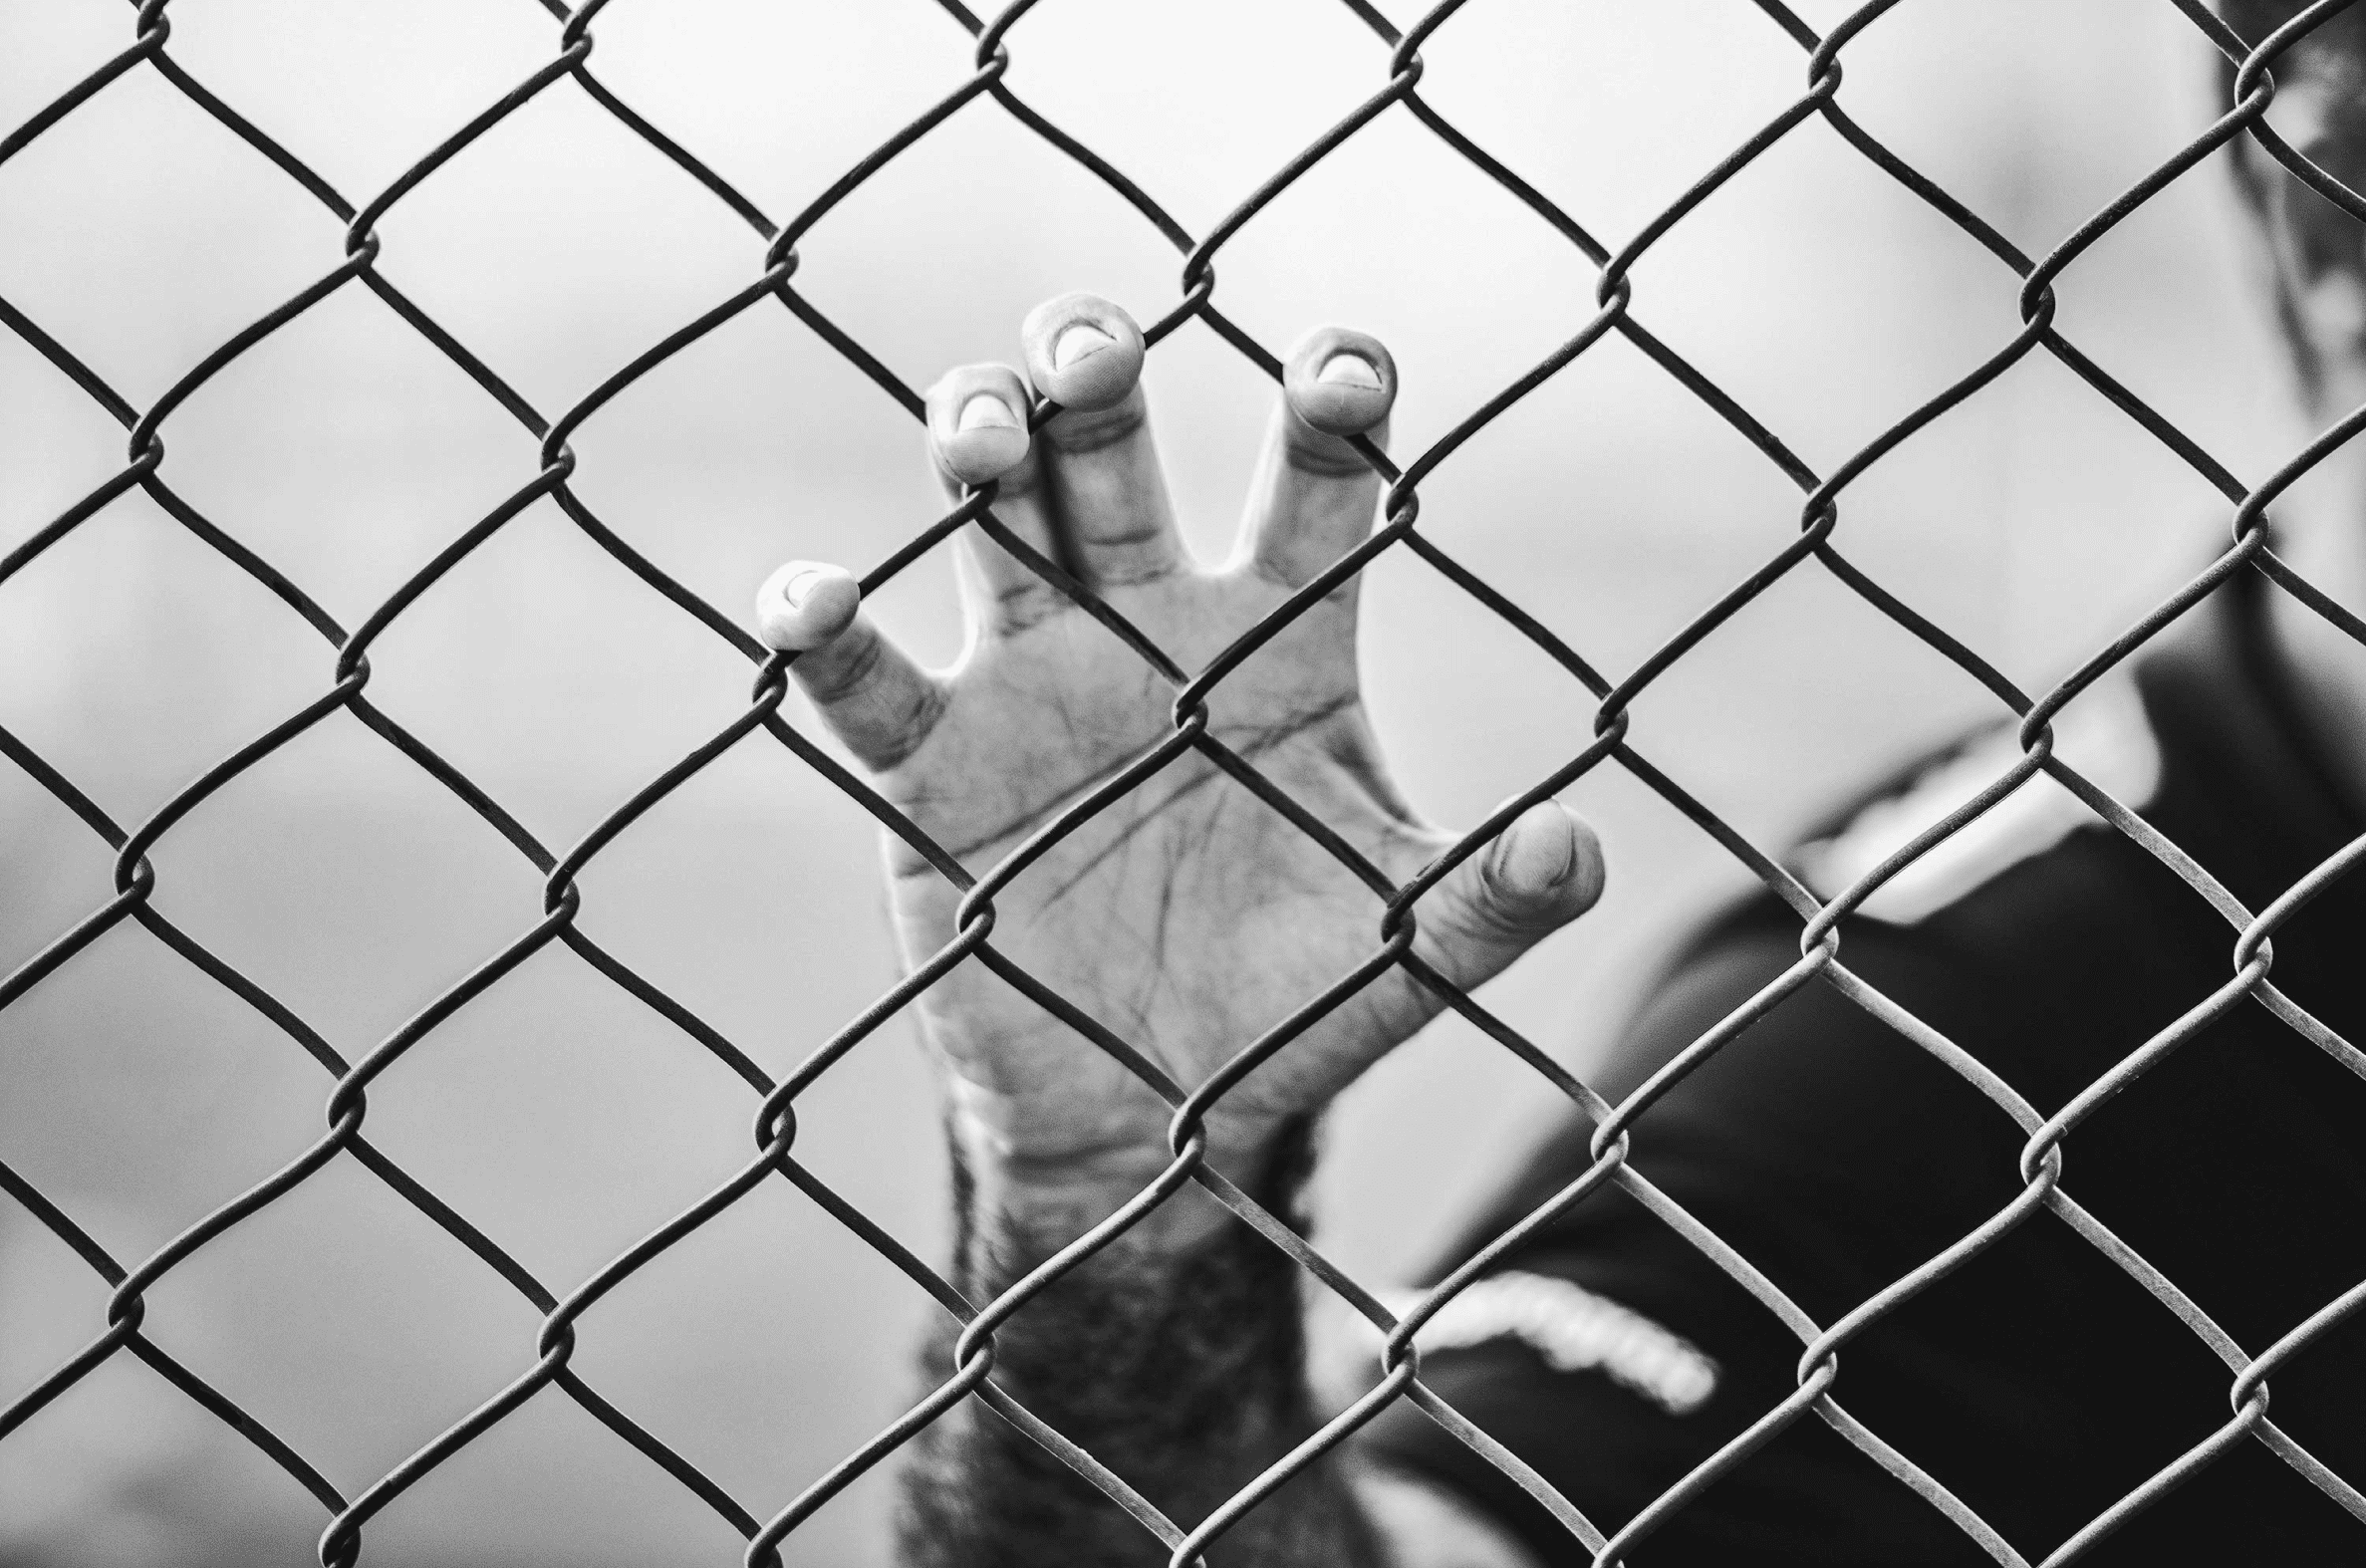 Image of a hand gripping a metal fence